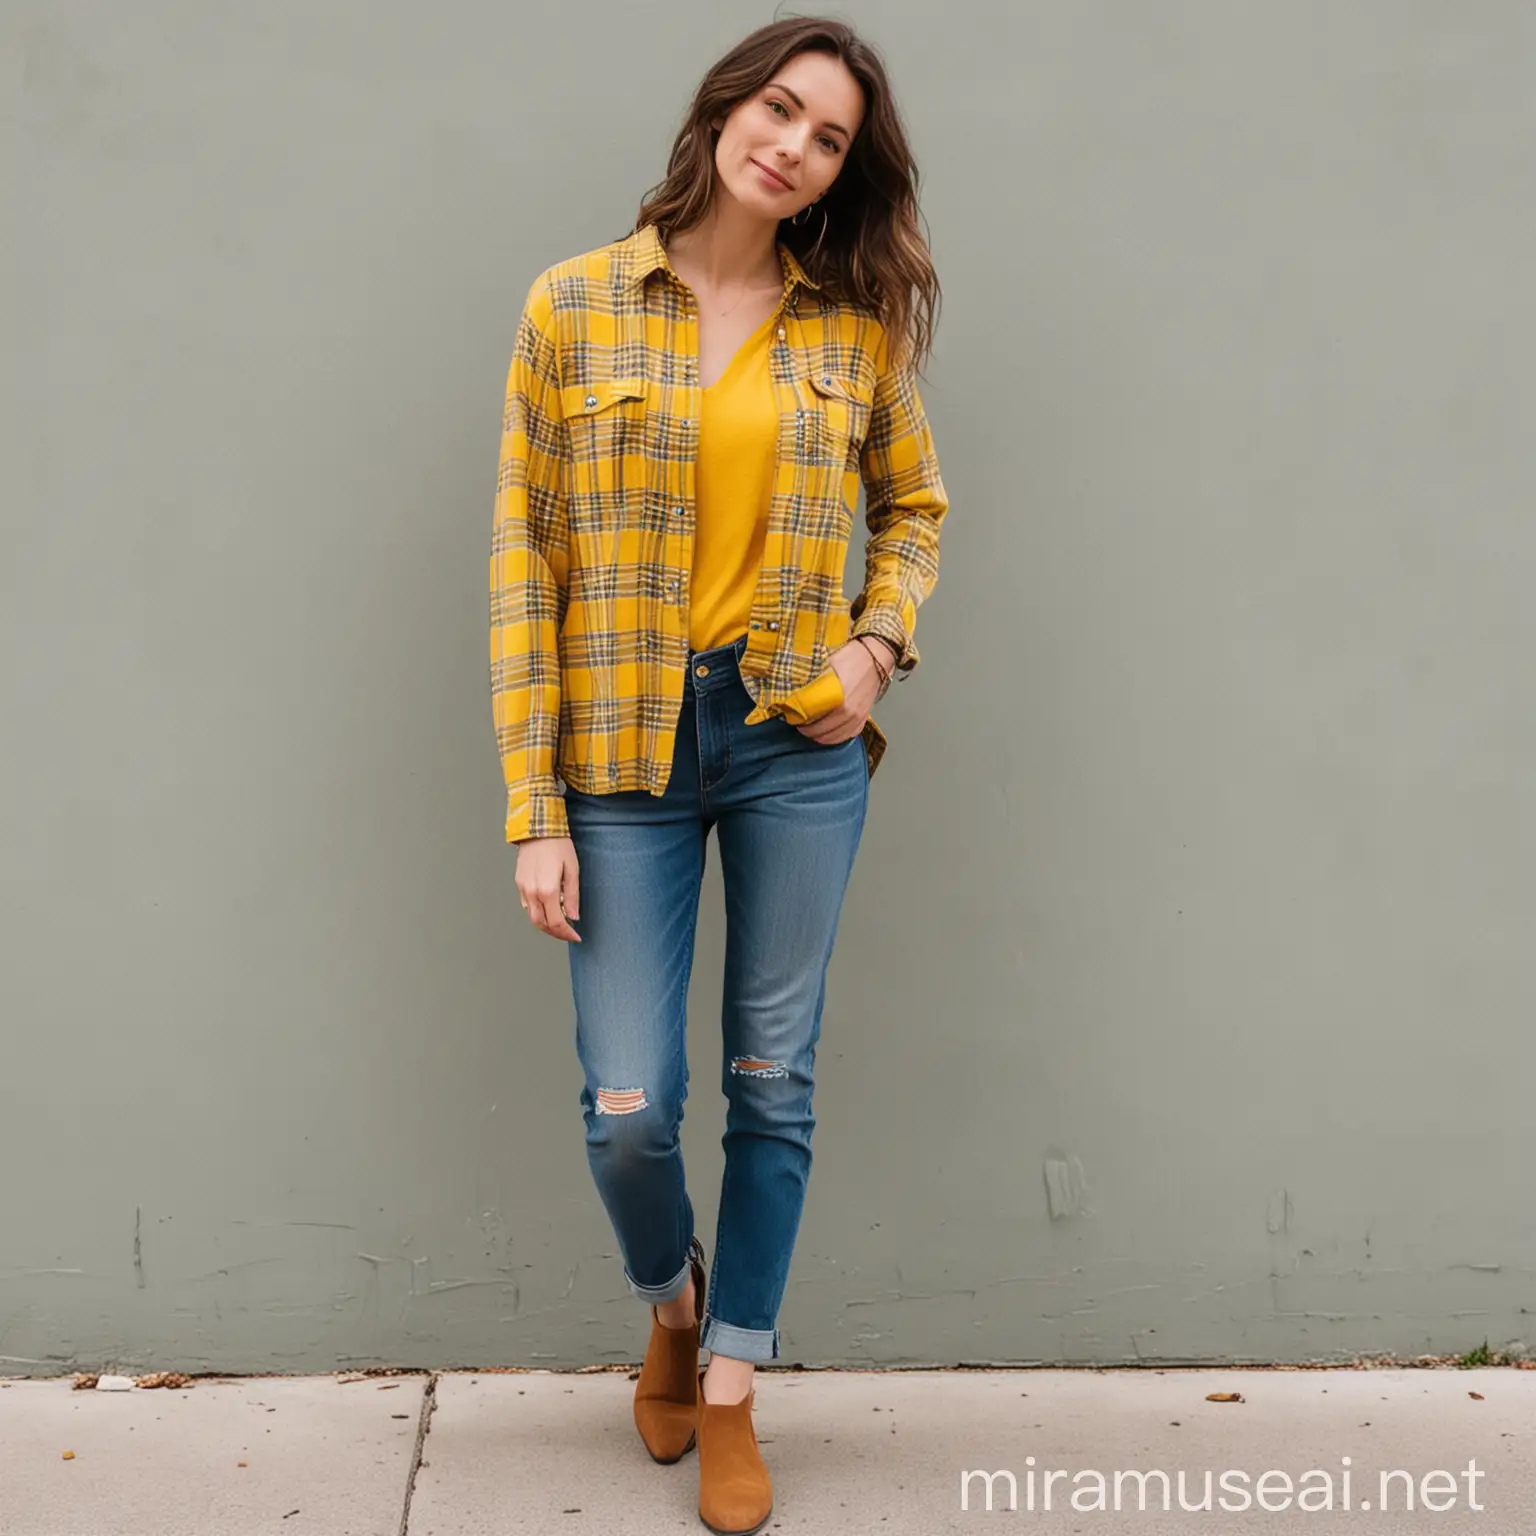 Casually Dressed Tall Woman in Yellow Flannel Shirt